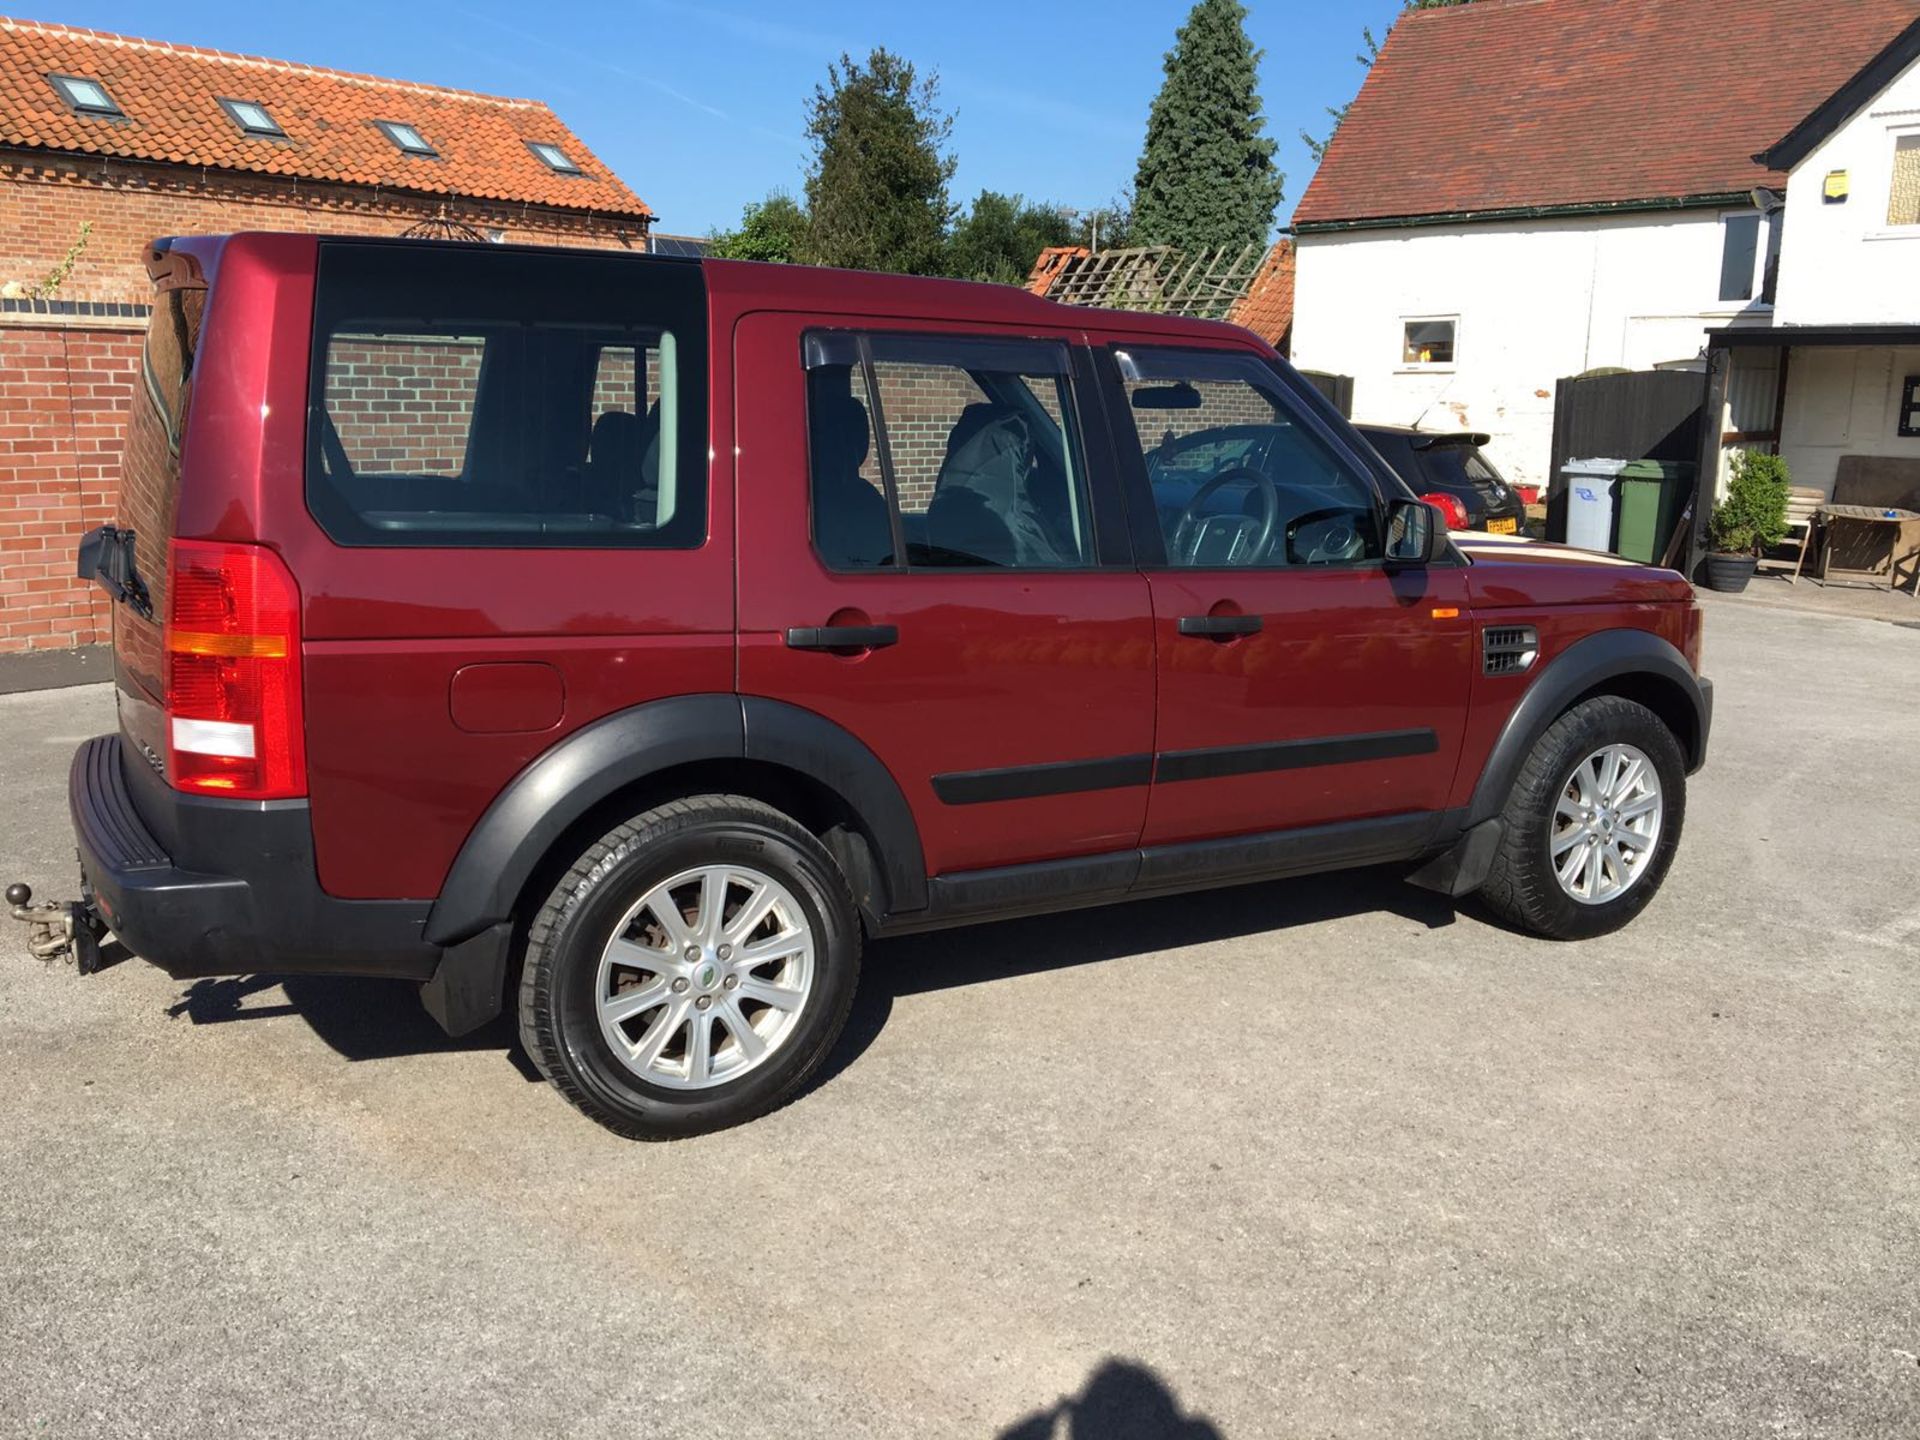 2005/54 REG LAND ROVER DISCOVERY 3 TDV6 S 7 SEATER - 1 FORMER KEEPER *NO VAT* - Image 2 of 12